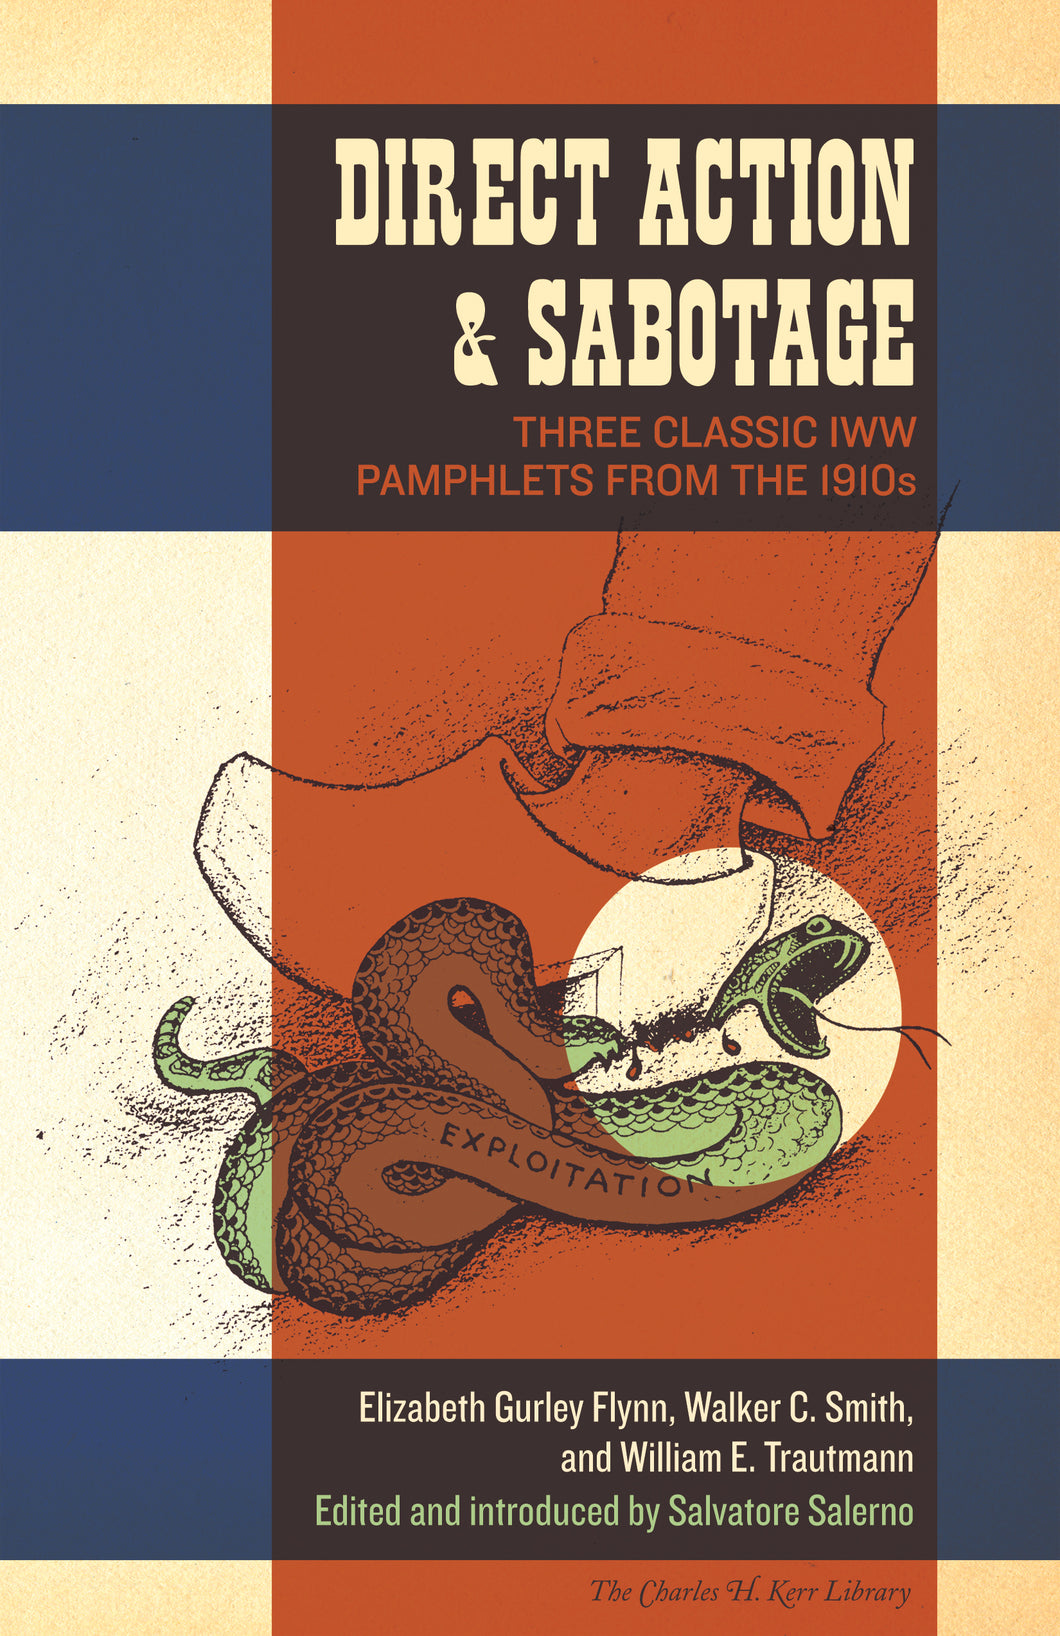 Direct Action and Sabotage: Three Classic IWW Pamphlets from the 1910s